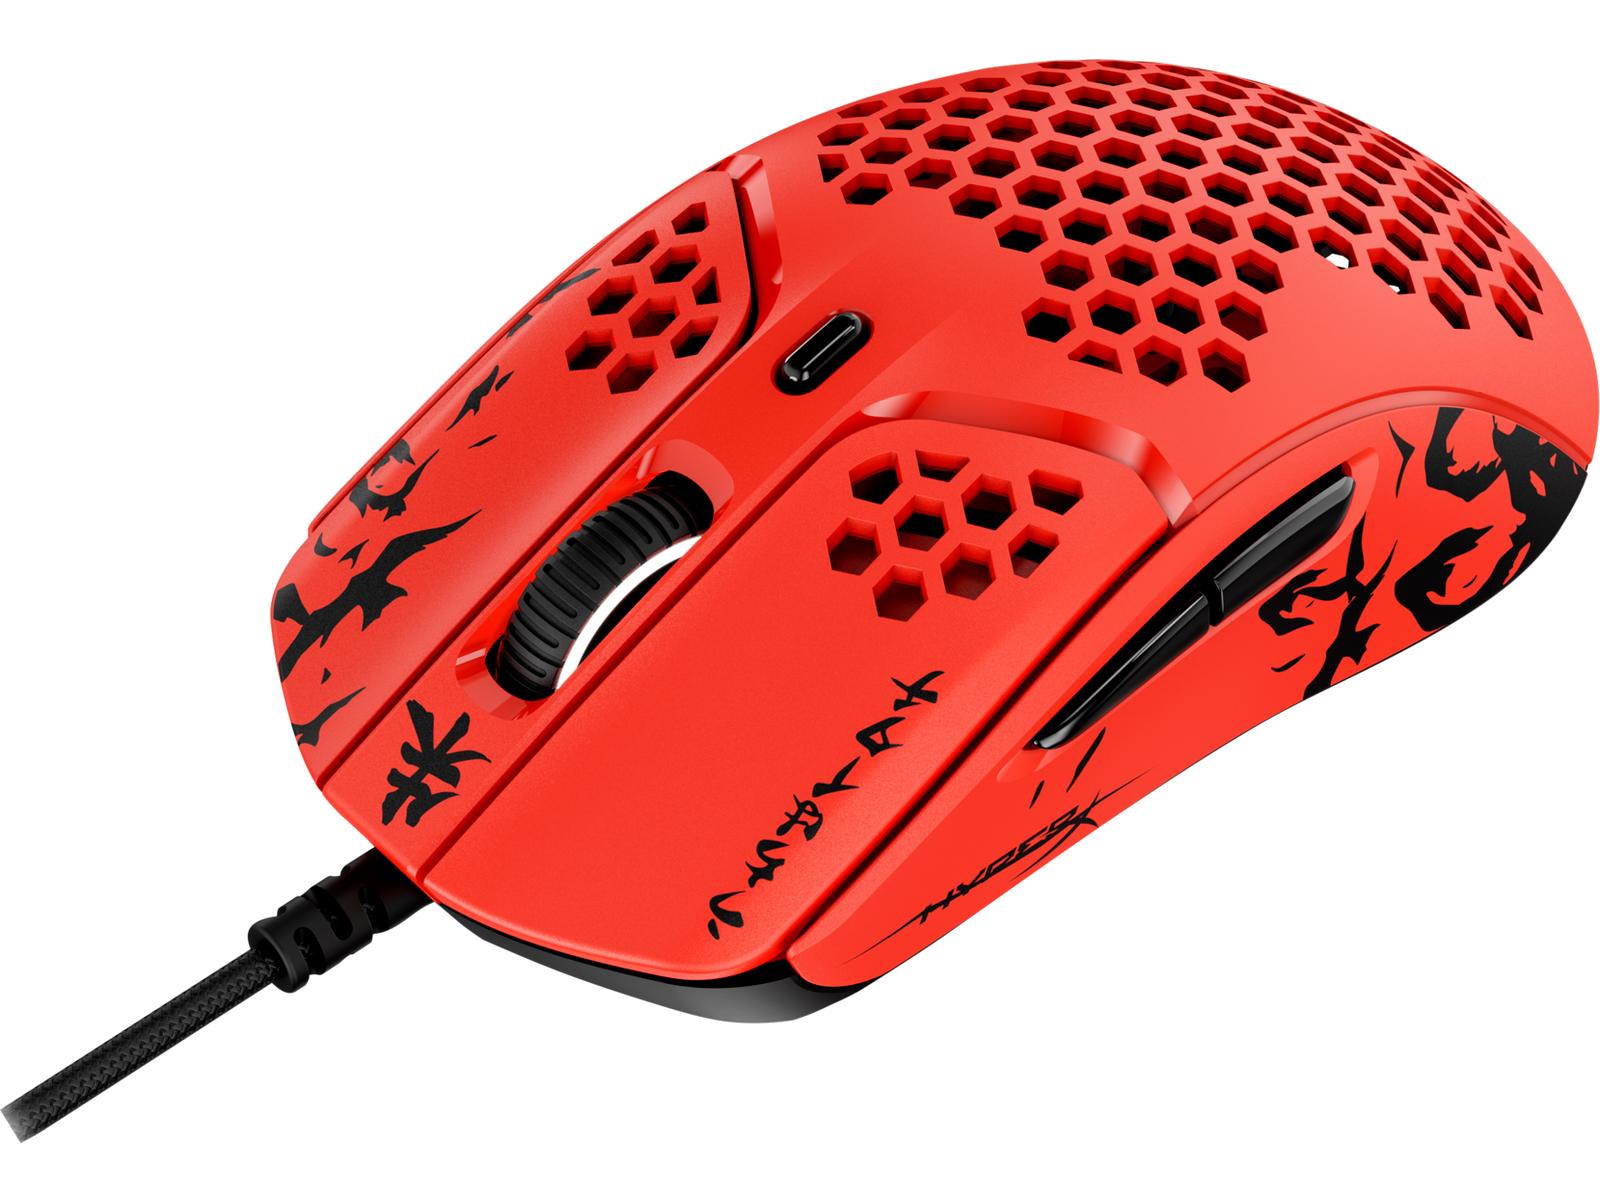 HyperX Pulsefire Haste 16000 DPI Wired Gaming Mouse for $19.99 Shipped